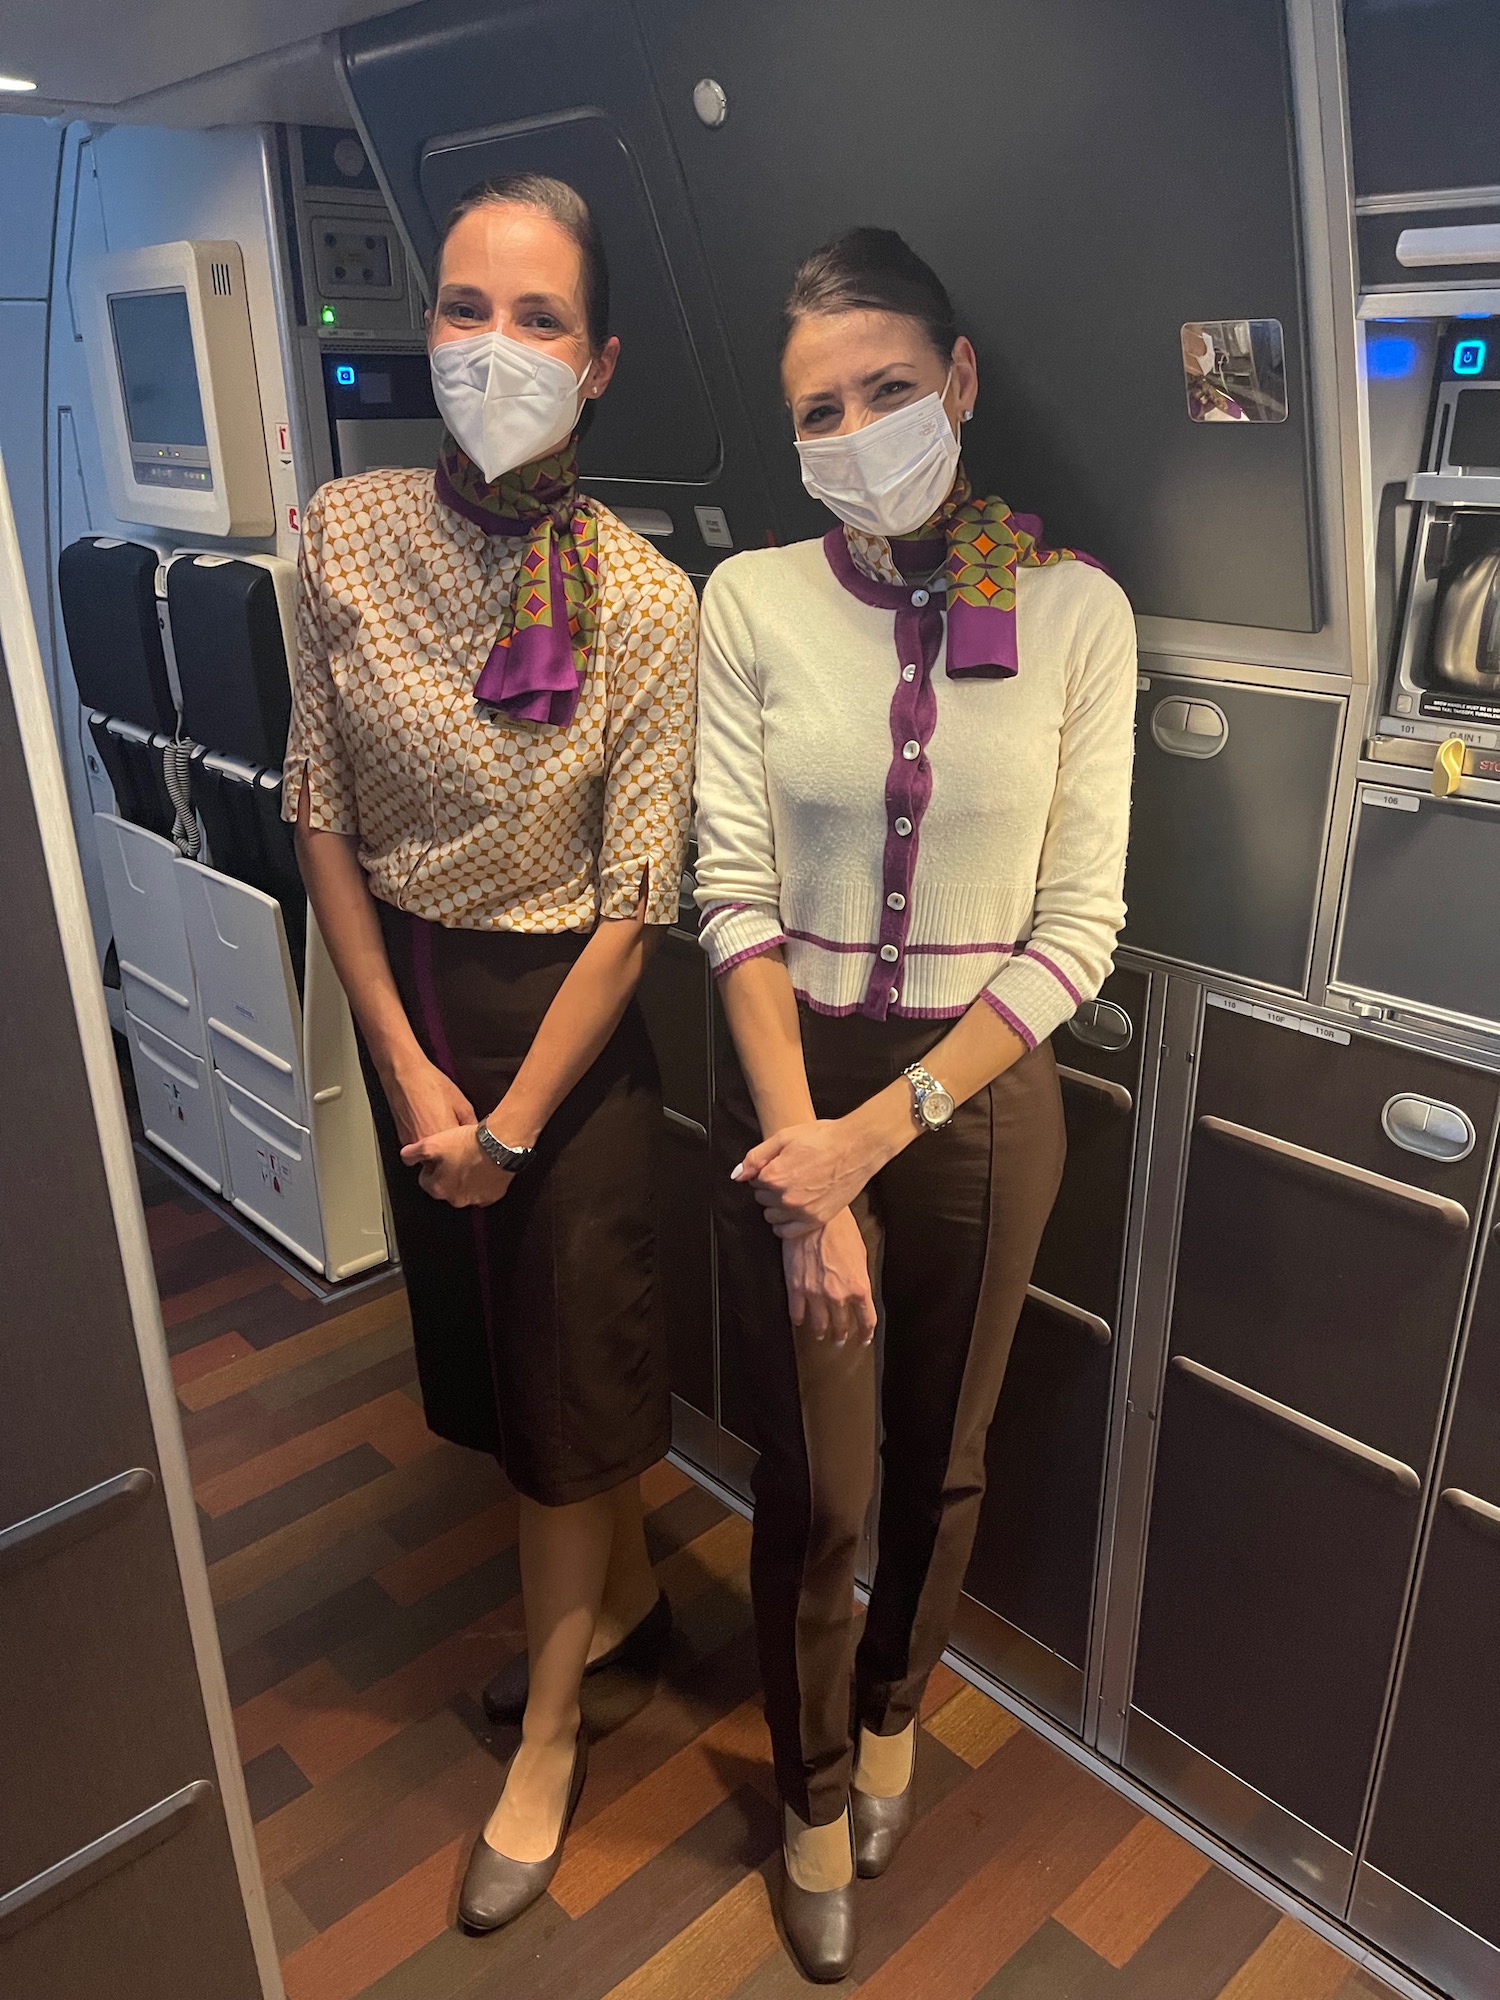 two women wearing masks and standing in a room